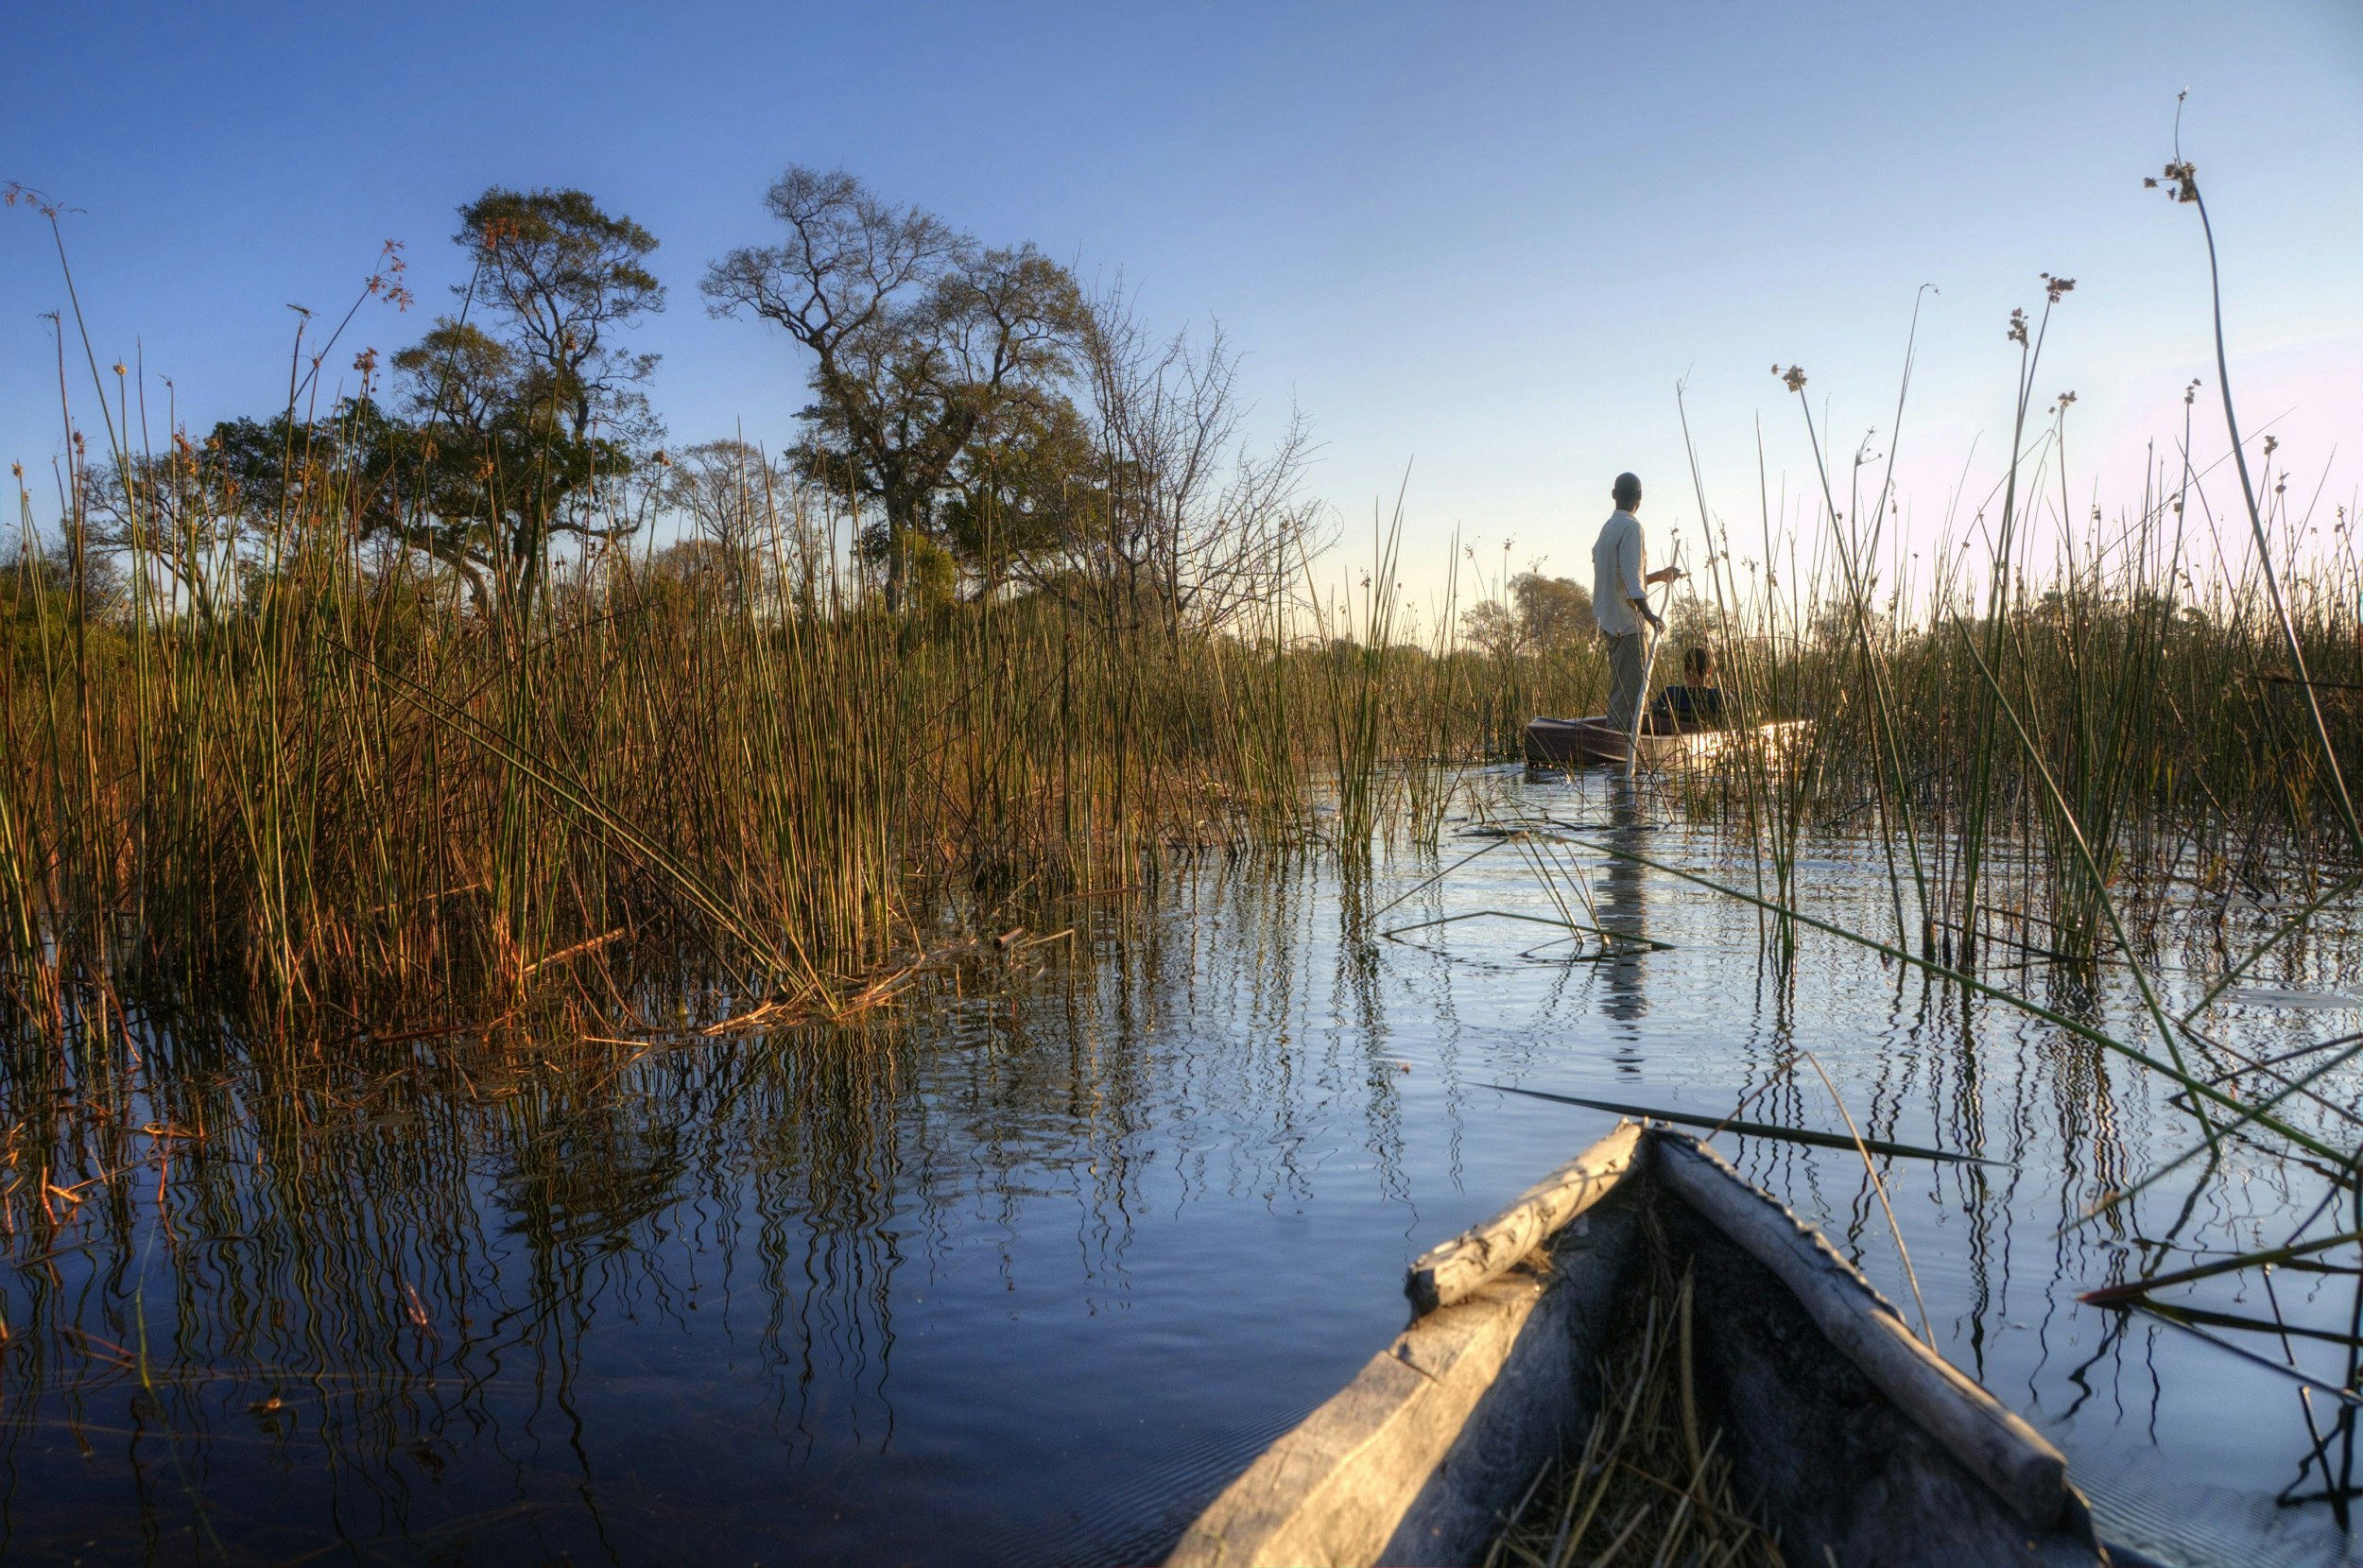 The front of a mokoro (dugout canoe) is visible going through long reeds in the waters of the Okavango Delta; ahead, deeper in the reeds and moving past a tree is another mokoro being poled by the guide.